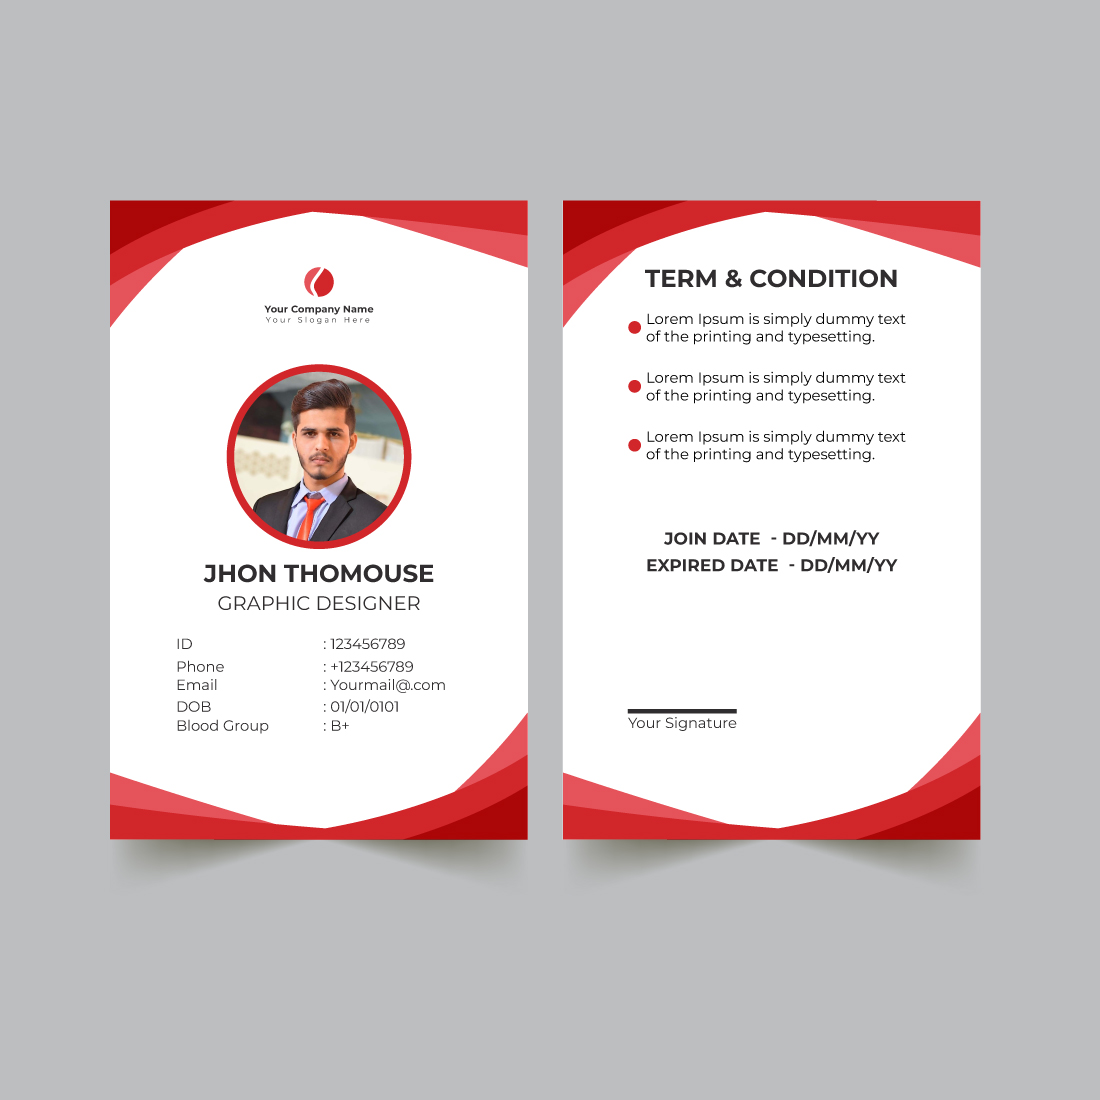 ID Card Design Template cover image.